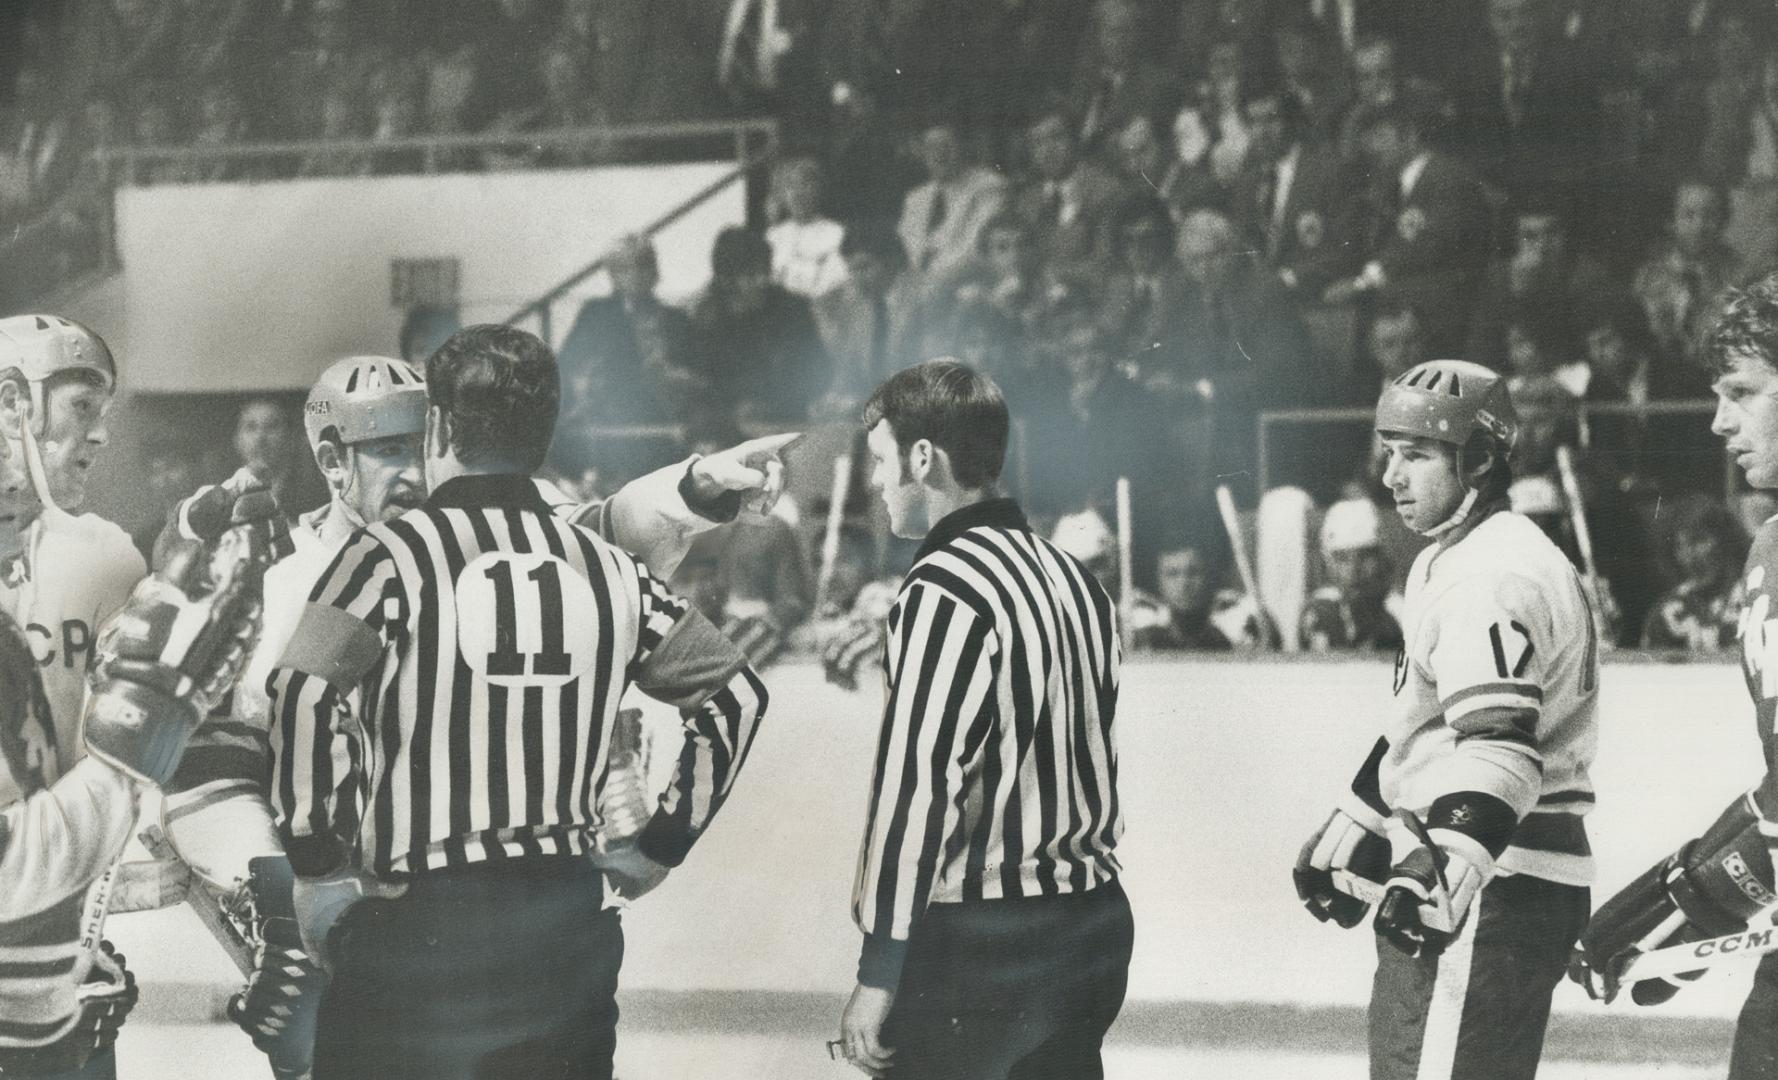 USSR Players dispute the disallowed goal with the officials